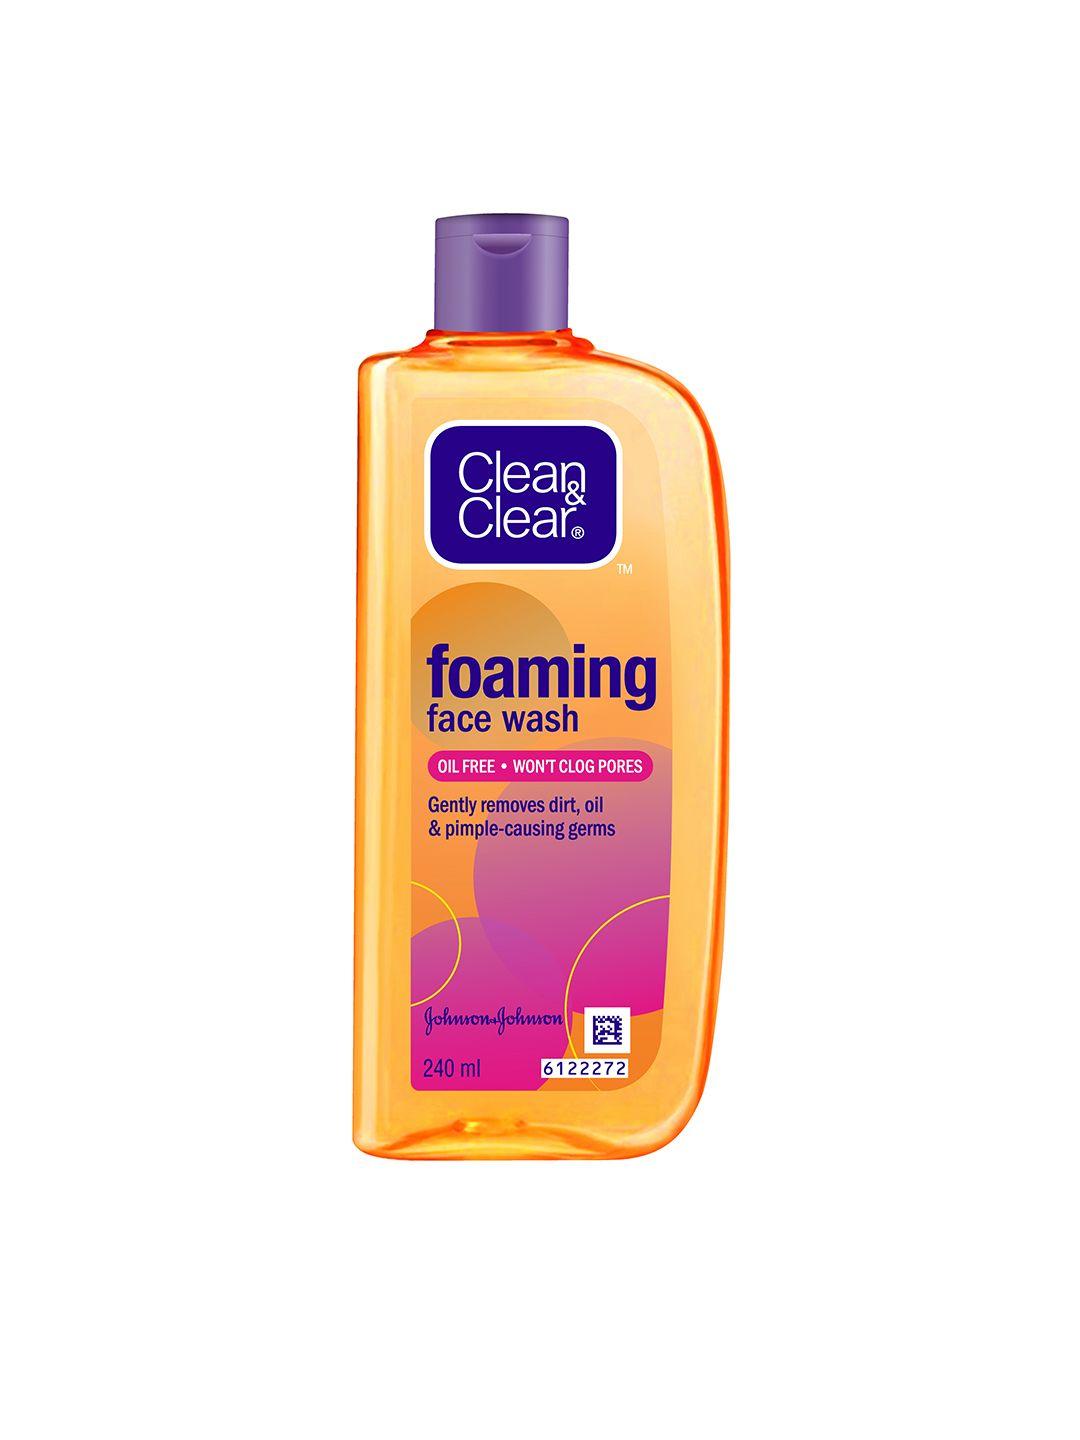 clean&clear foaming face wash for oily skin, acne prone skin 240 ml